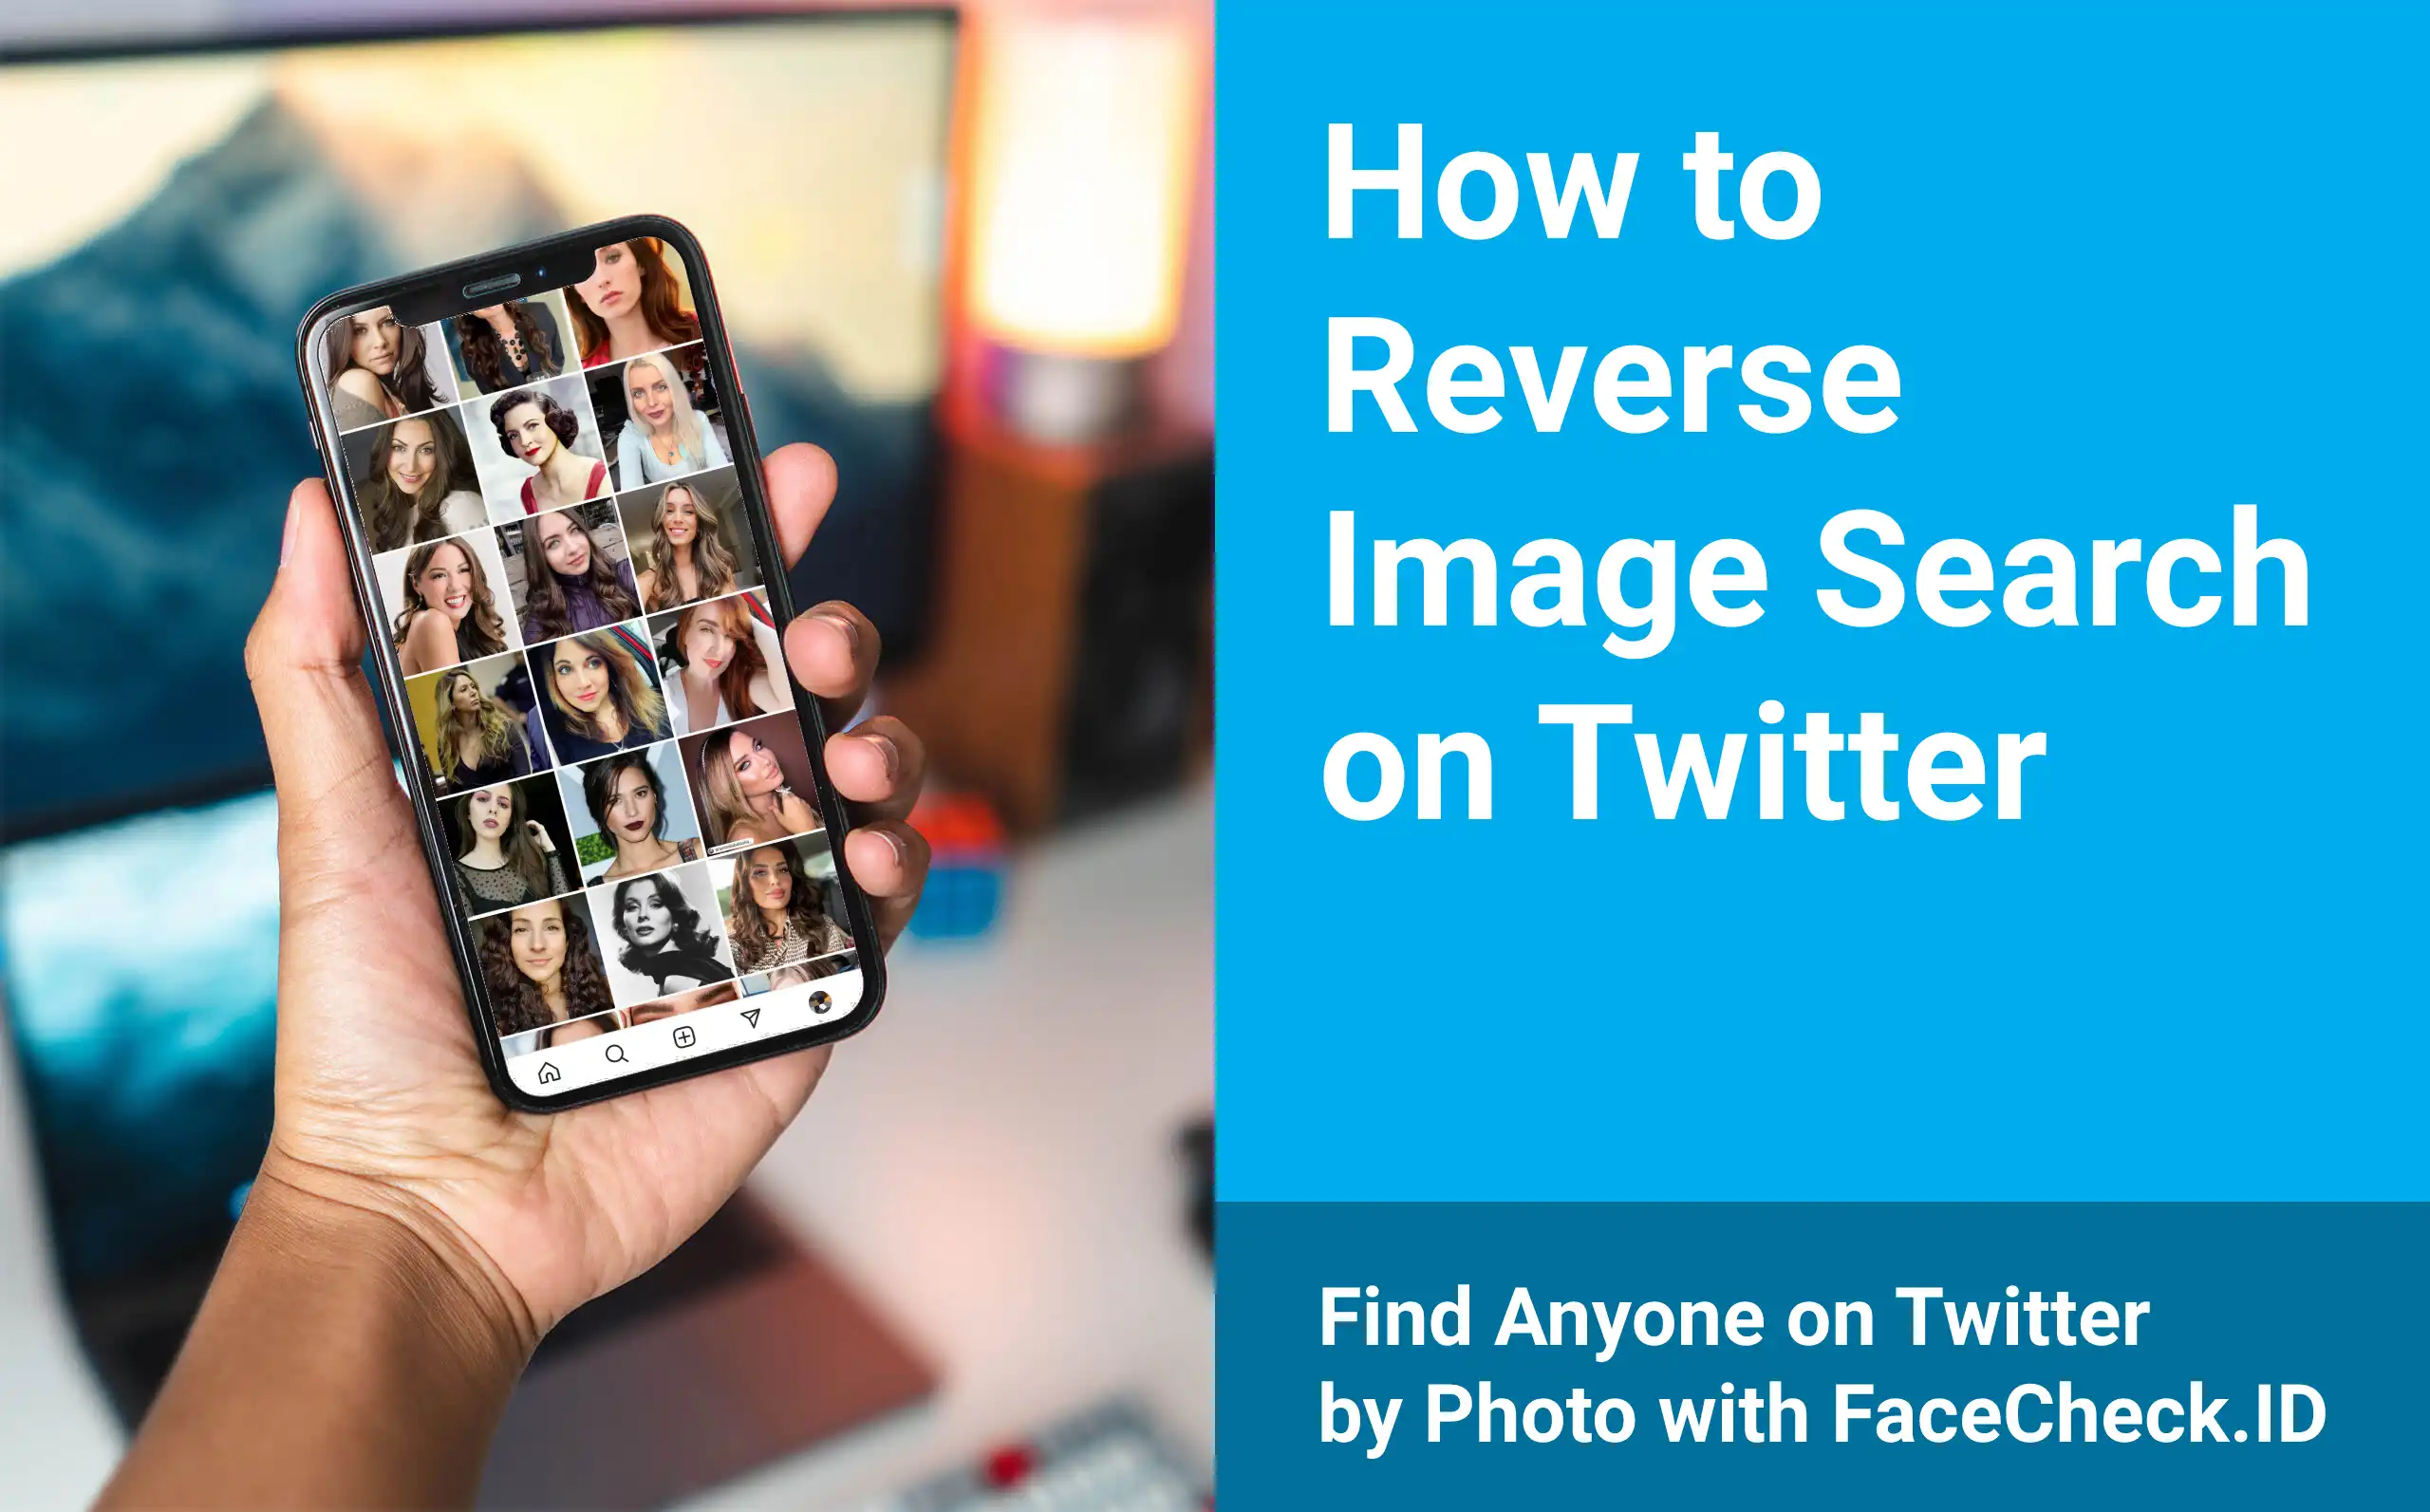 How to Perform a Reverse Image Search on Twitter